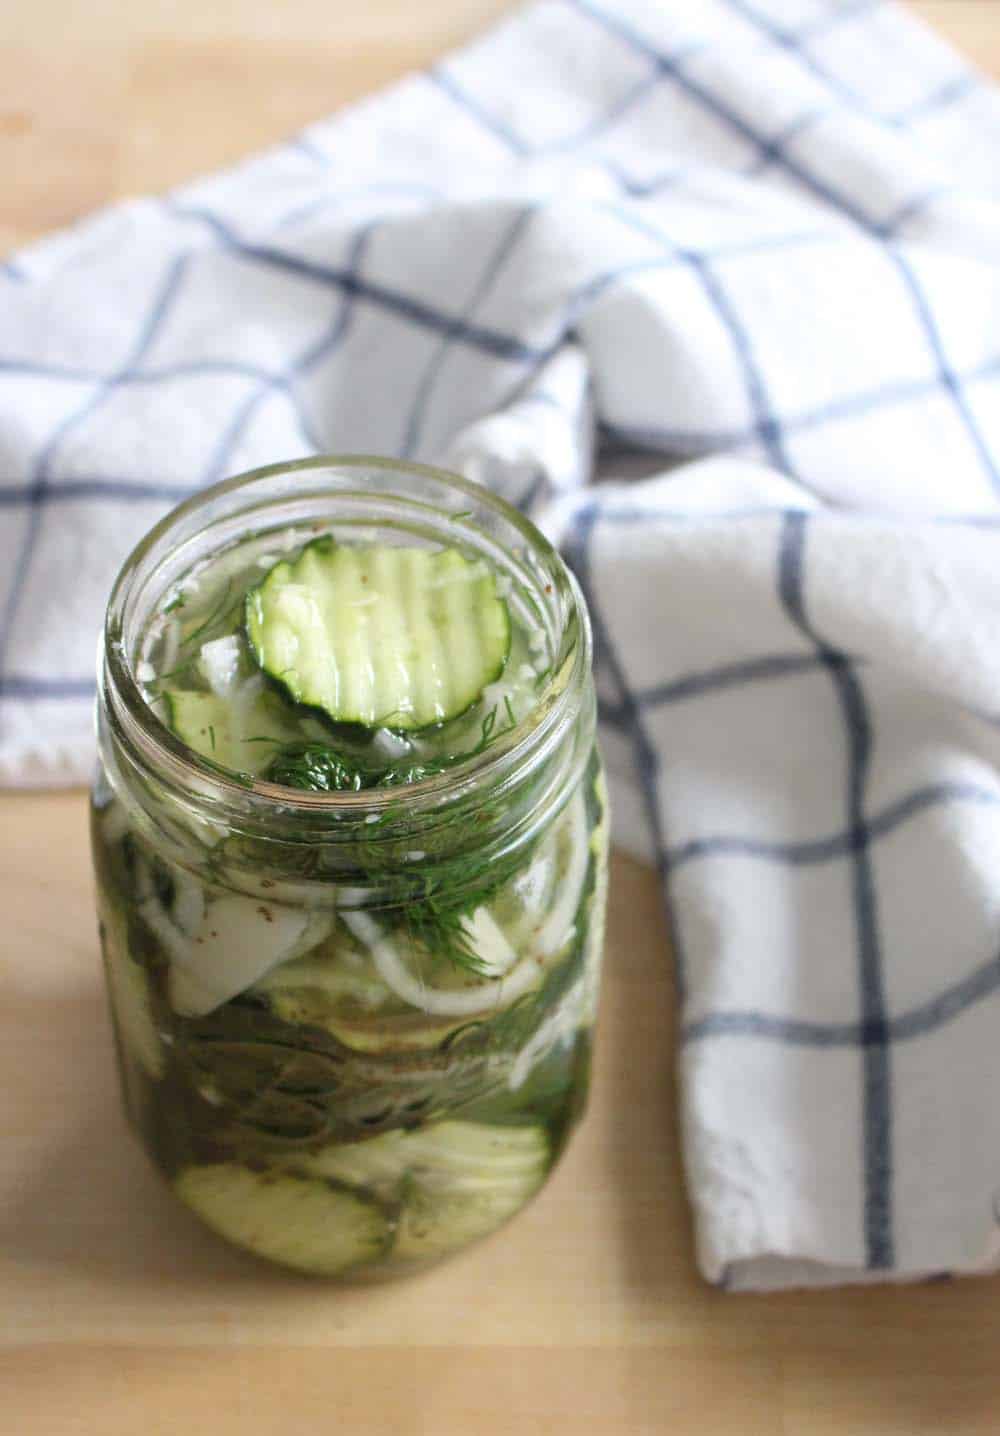 Open glass jar filled with pickles in their juice with herbs, on a wooden table next to a blue and white checkered cloth.